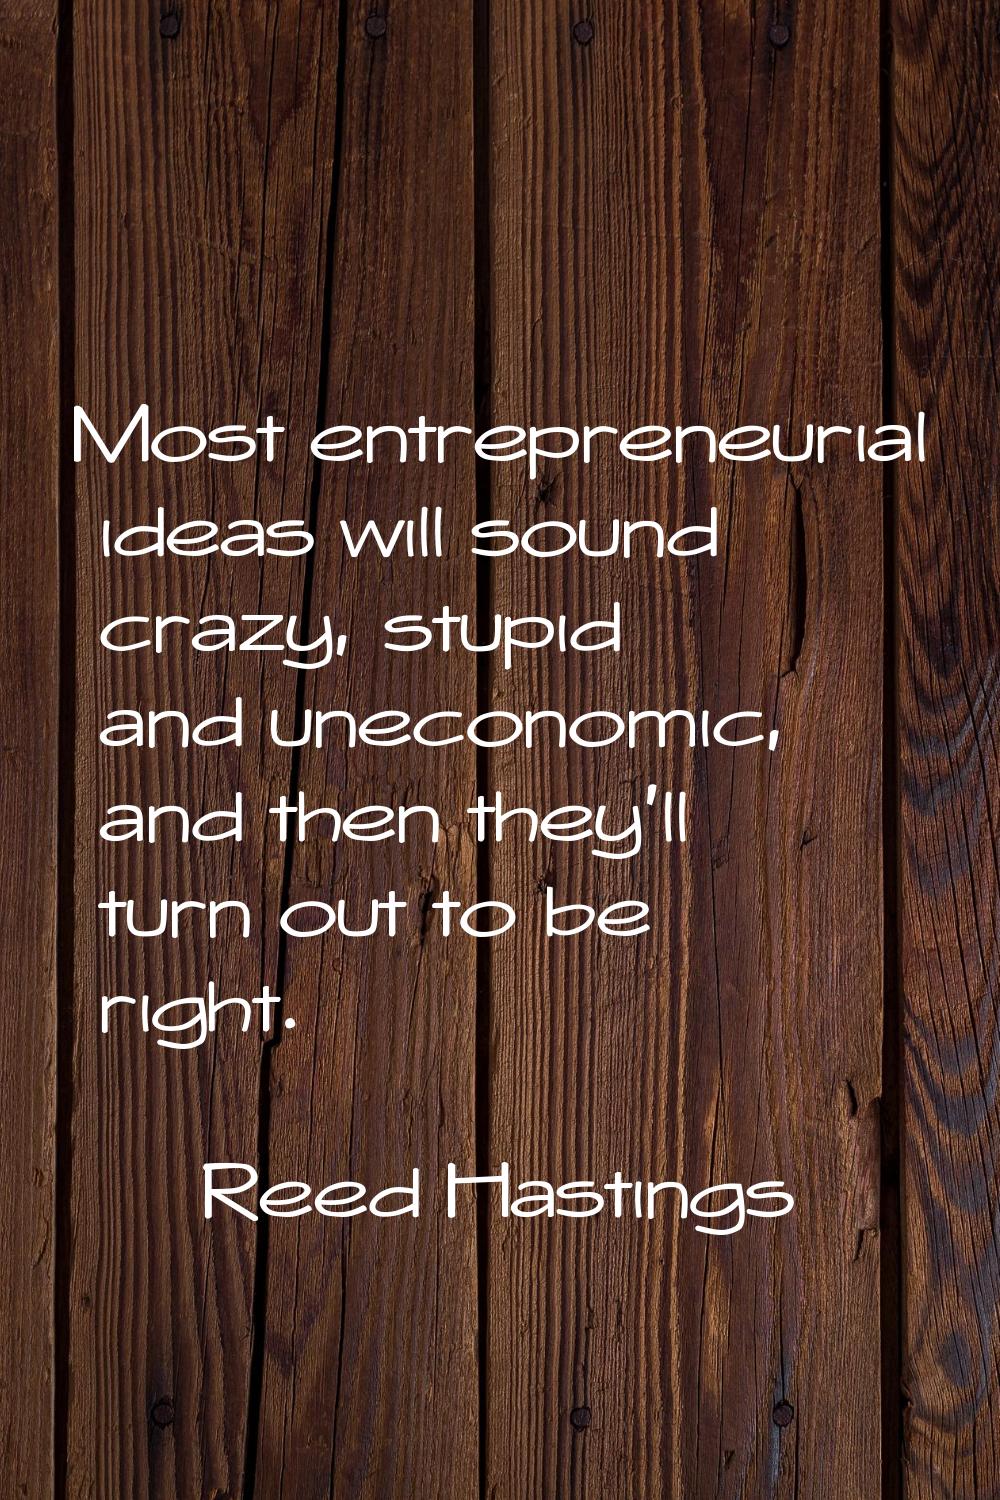 Most entrepreneurial ideas will sound crazy, stupid and uneconomic, and then they'll turn out to be